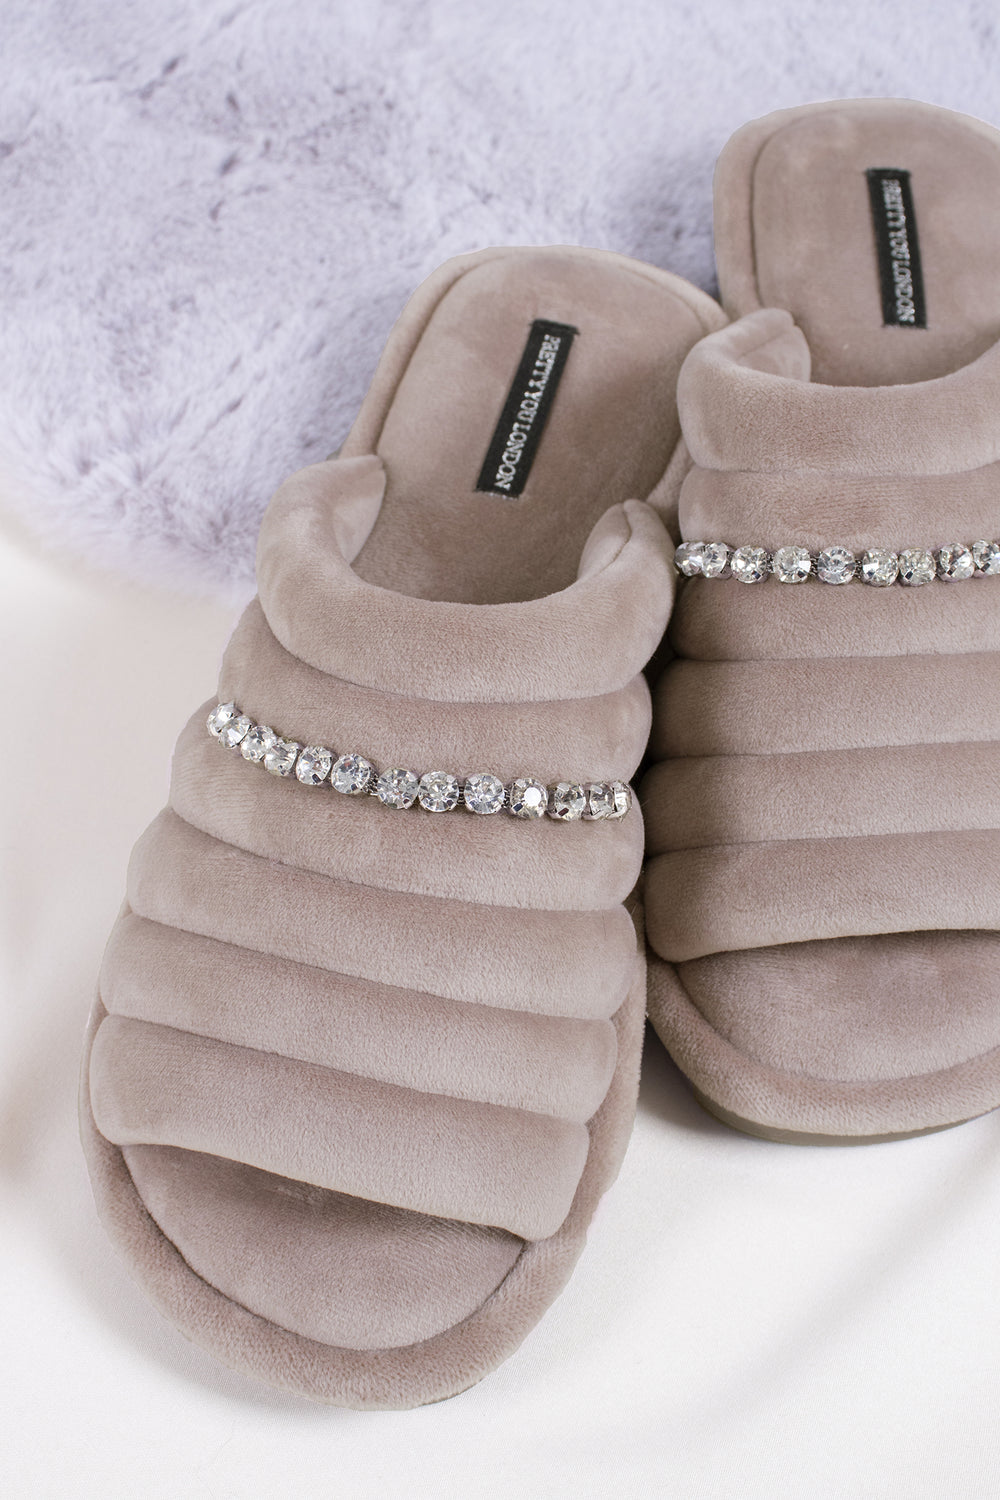 Frankie women's slider slippers in mink combining super-soft microfibre materials with a glistening crystal diamante strap from Pretty You London